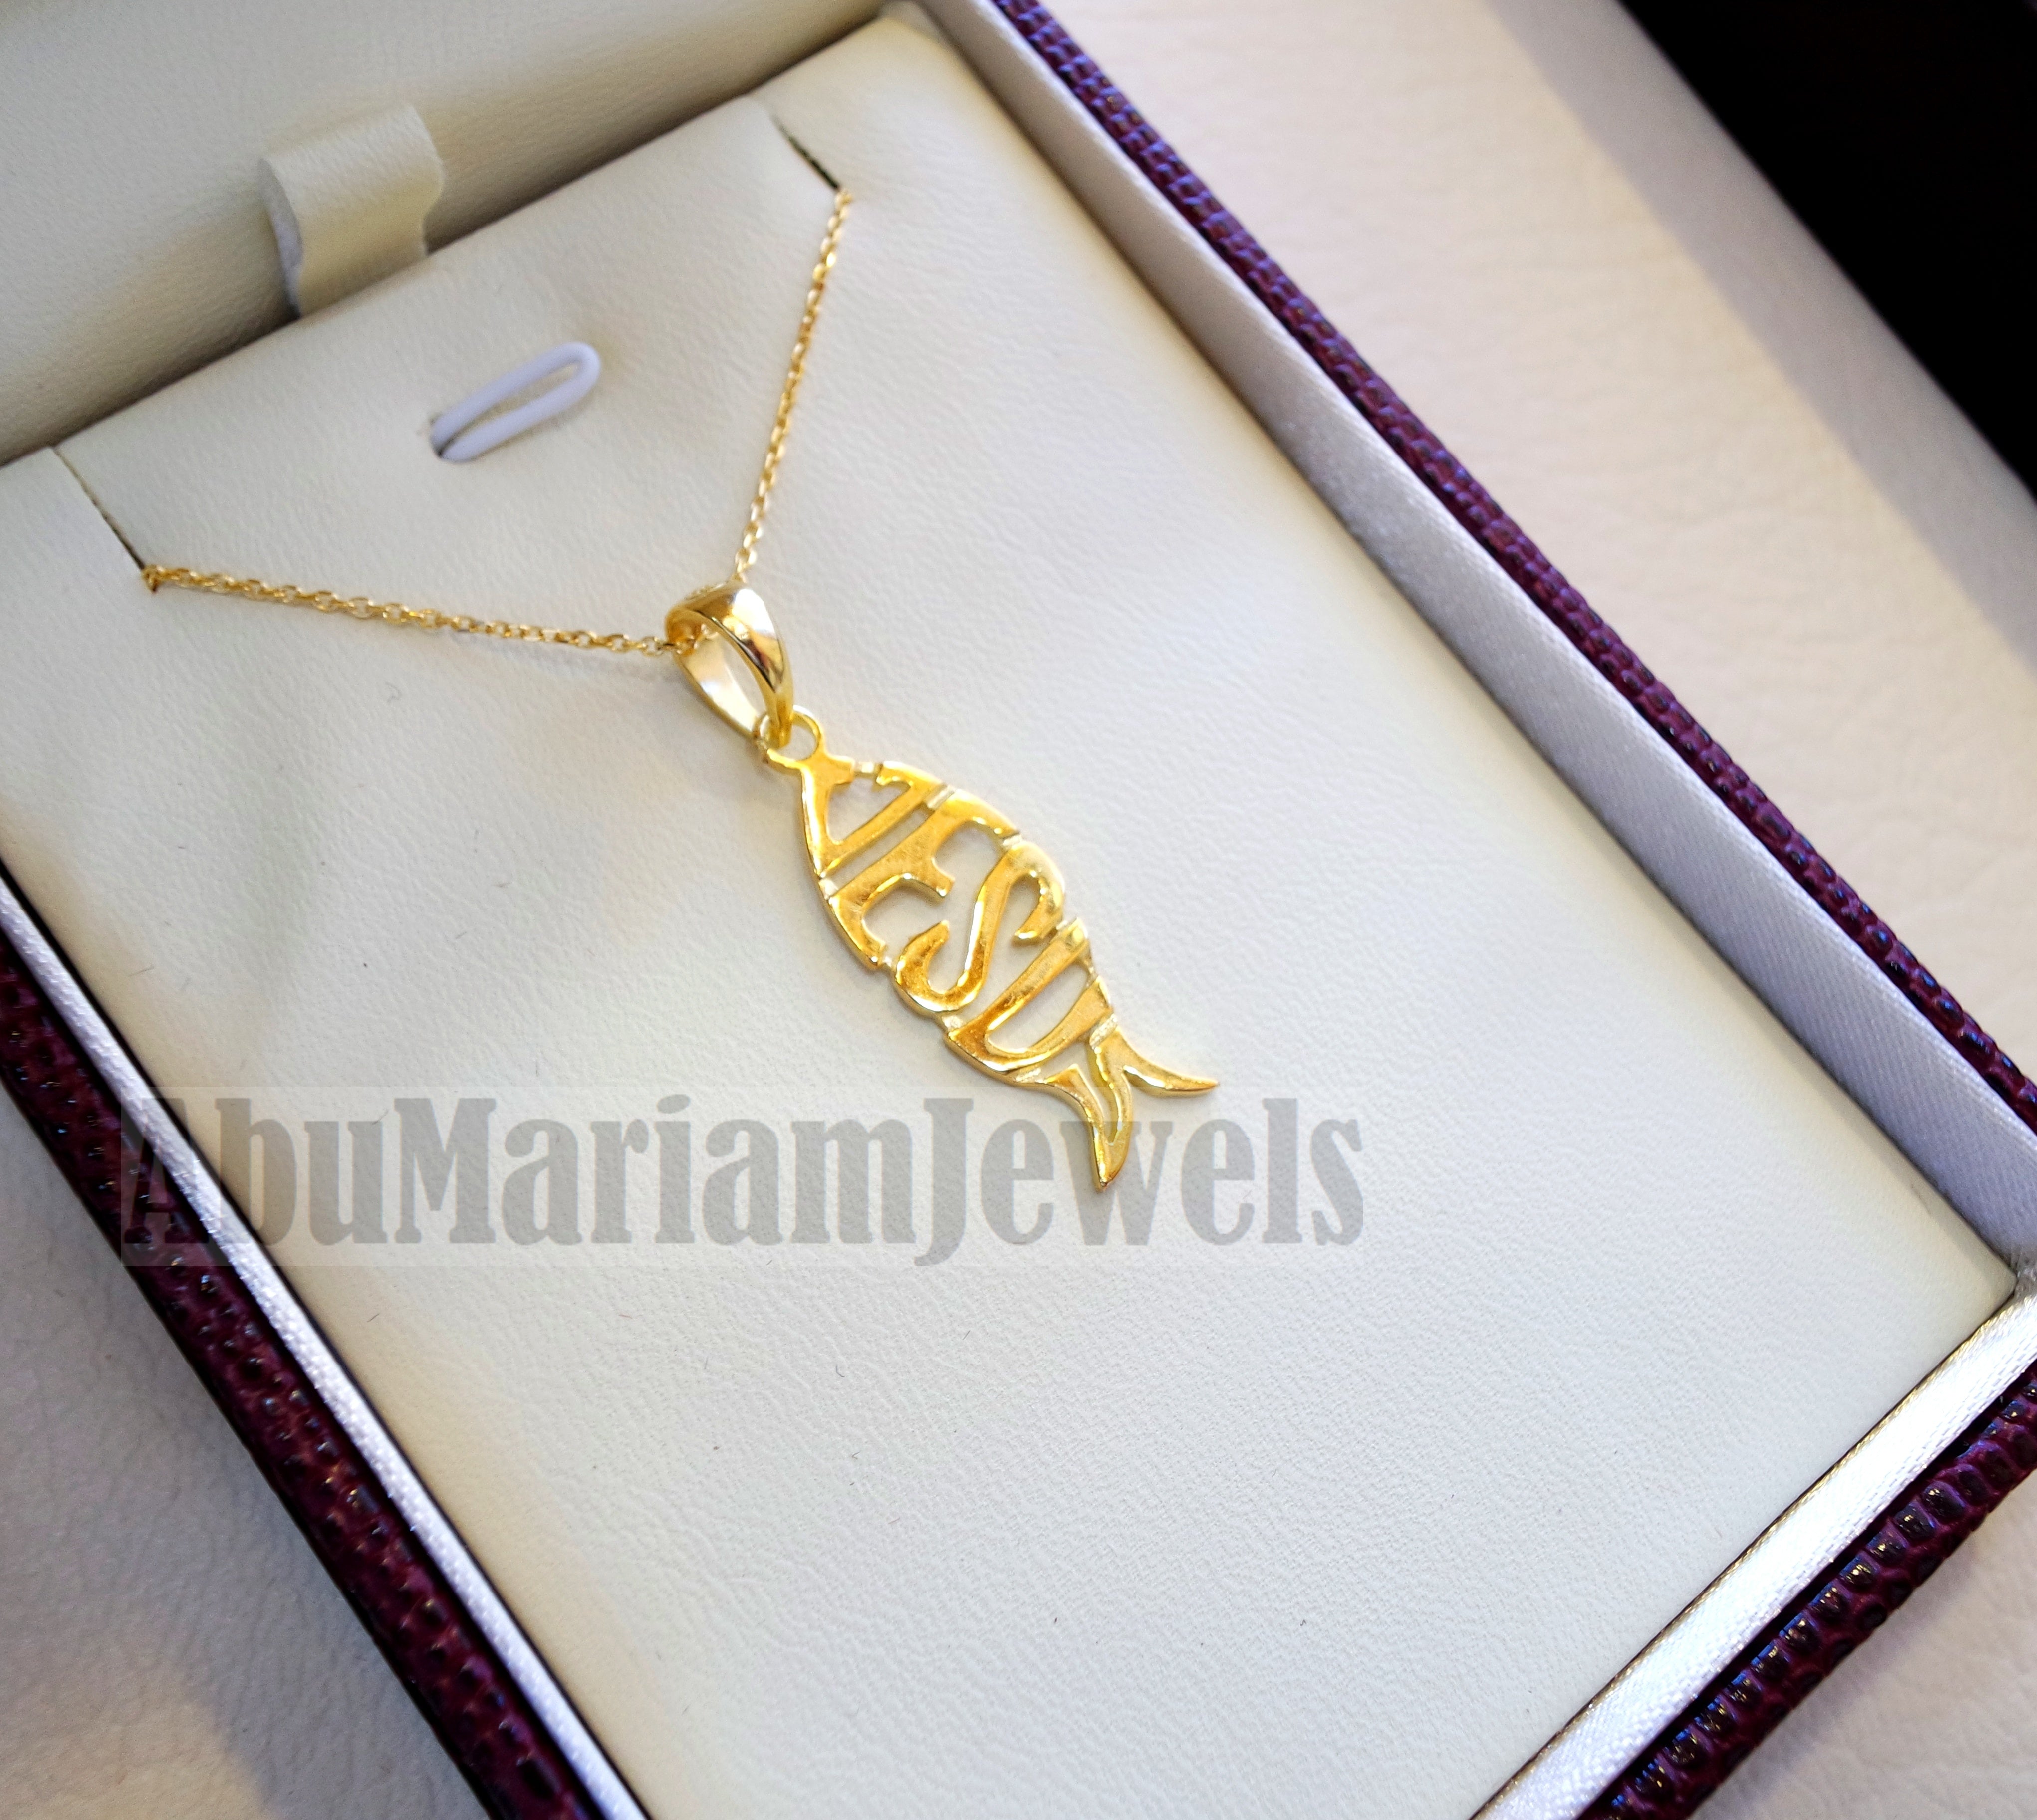 18K gold Icthys cross jesus pendant with chain 18K gold jewelry christianity fish bible and biblical necklace handmade express shipping